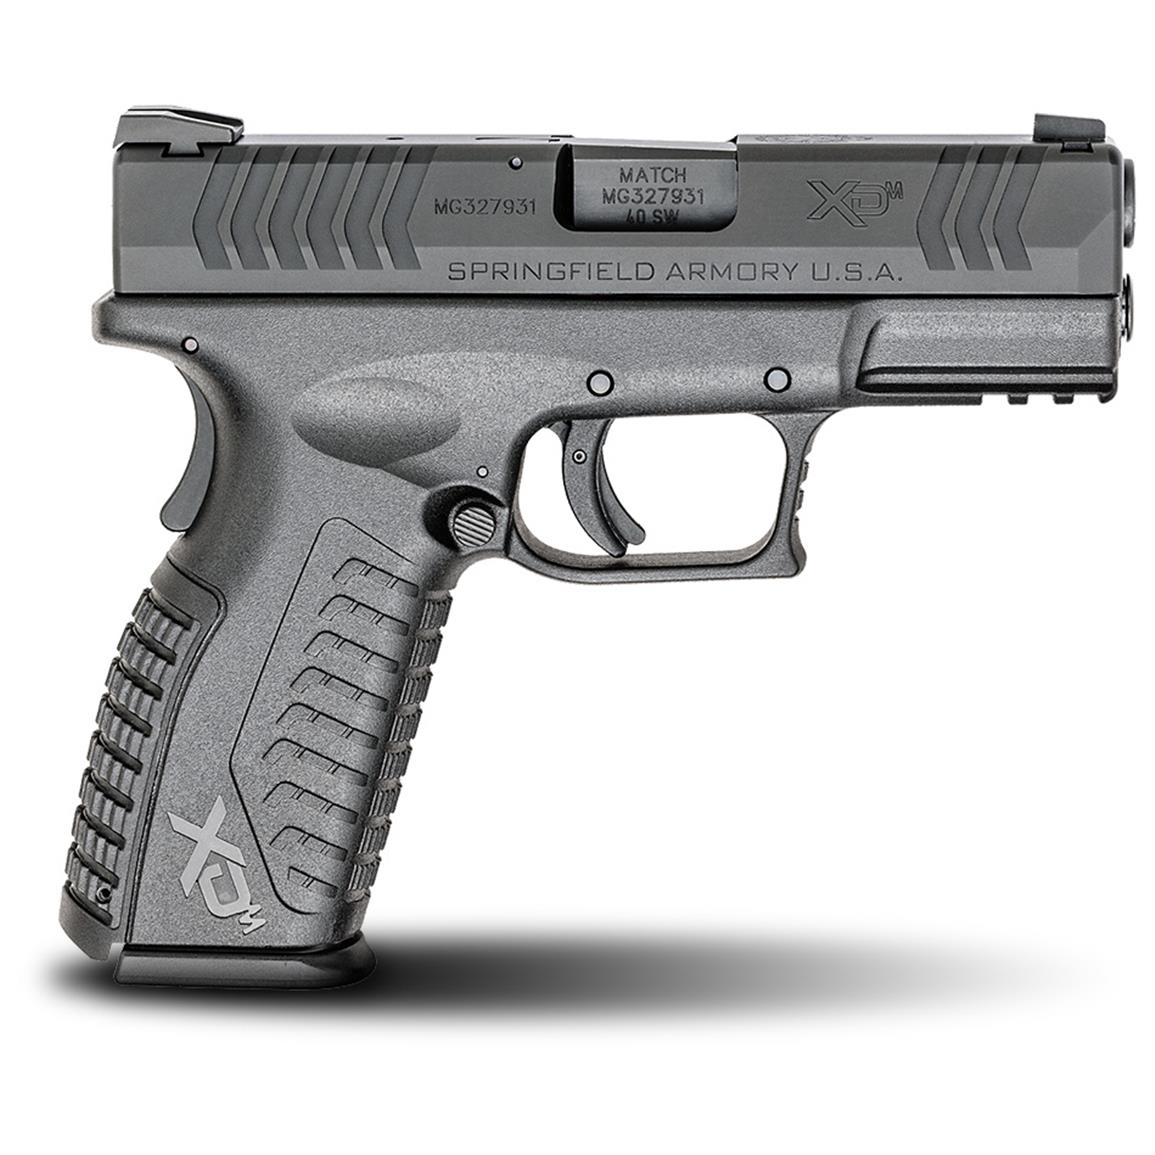 springfield-xd-m-3-8-compact-semi-automatic-40-smith-wesson